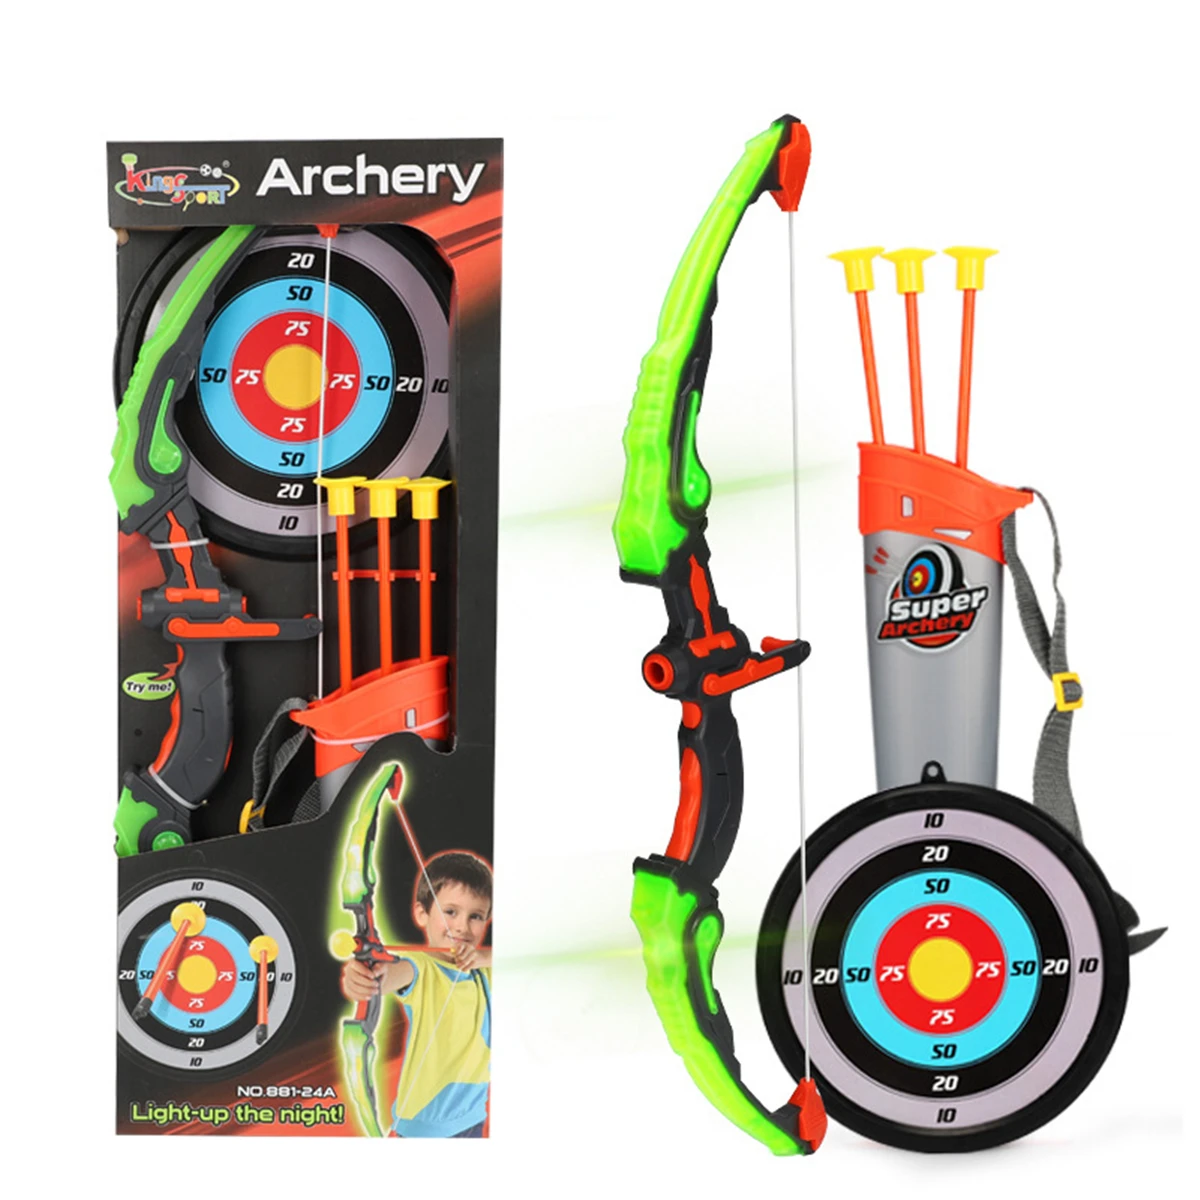 Red iMay 45 Bow and Arrows Set with 9 Arrows 2 Target Faces for Teens Outdoor Archery Beginner Gift Recurve Bow Longbow Kit 